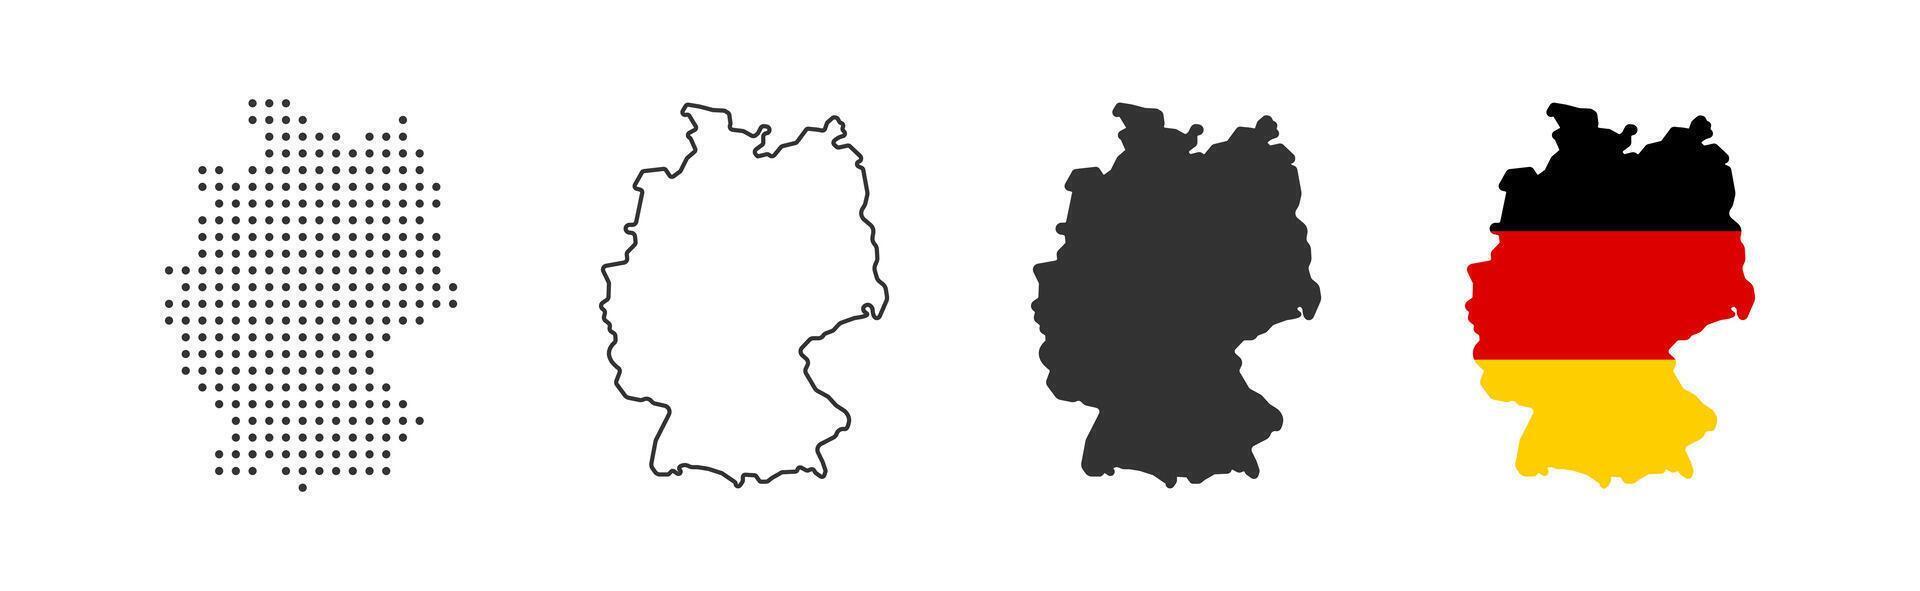 Germany map icon. Germany border. Country flag sign. Europe geography. Vector illustration.